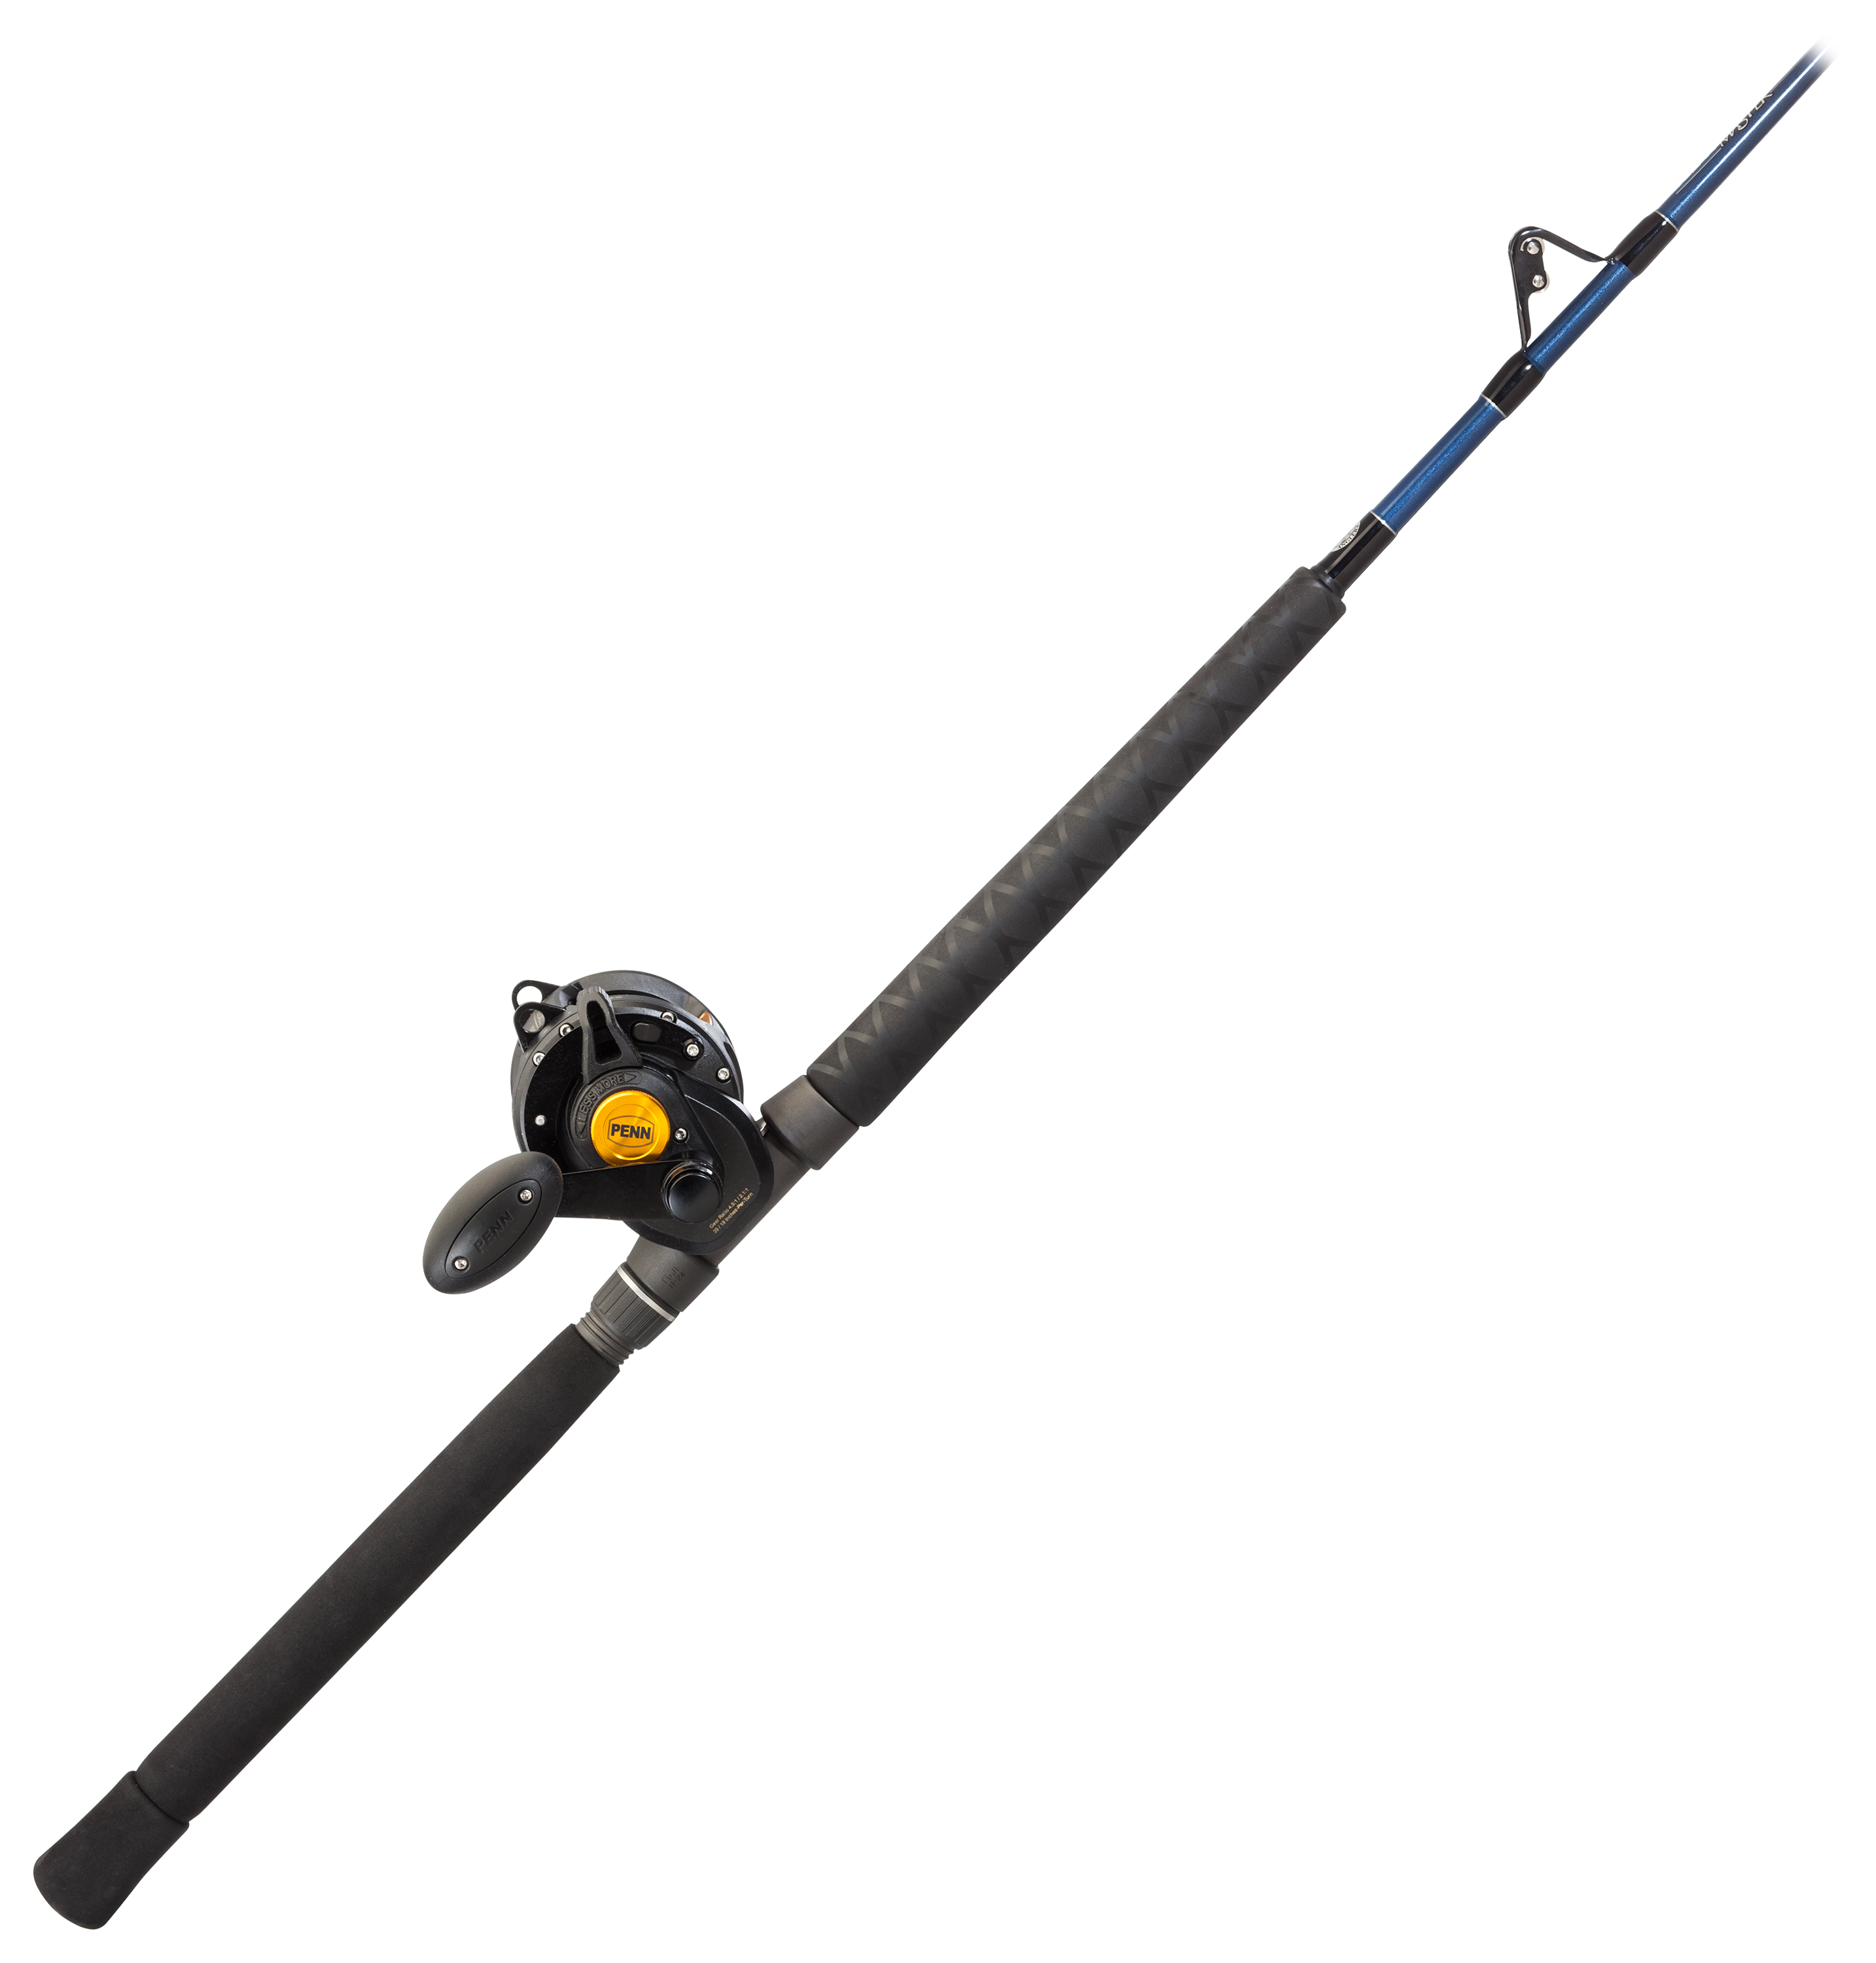 PENN Squall 2-speed Lever Drag/Offshore Angler Ocean Master OMSU Stand-Up Rod and Reel Combo - SQL16VS/OMSU-4C